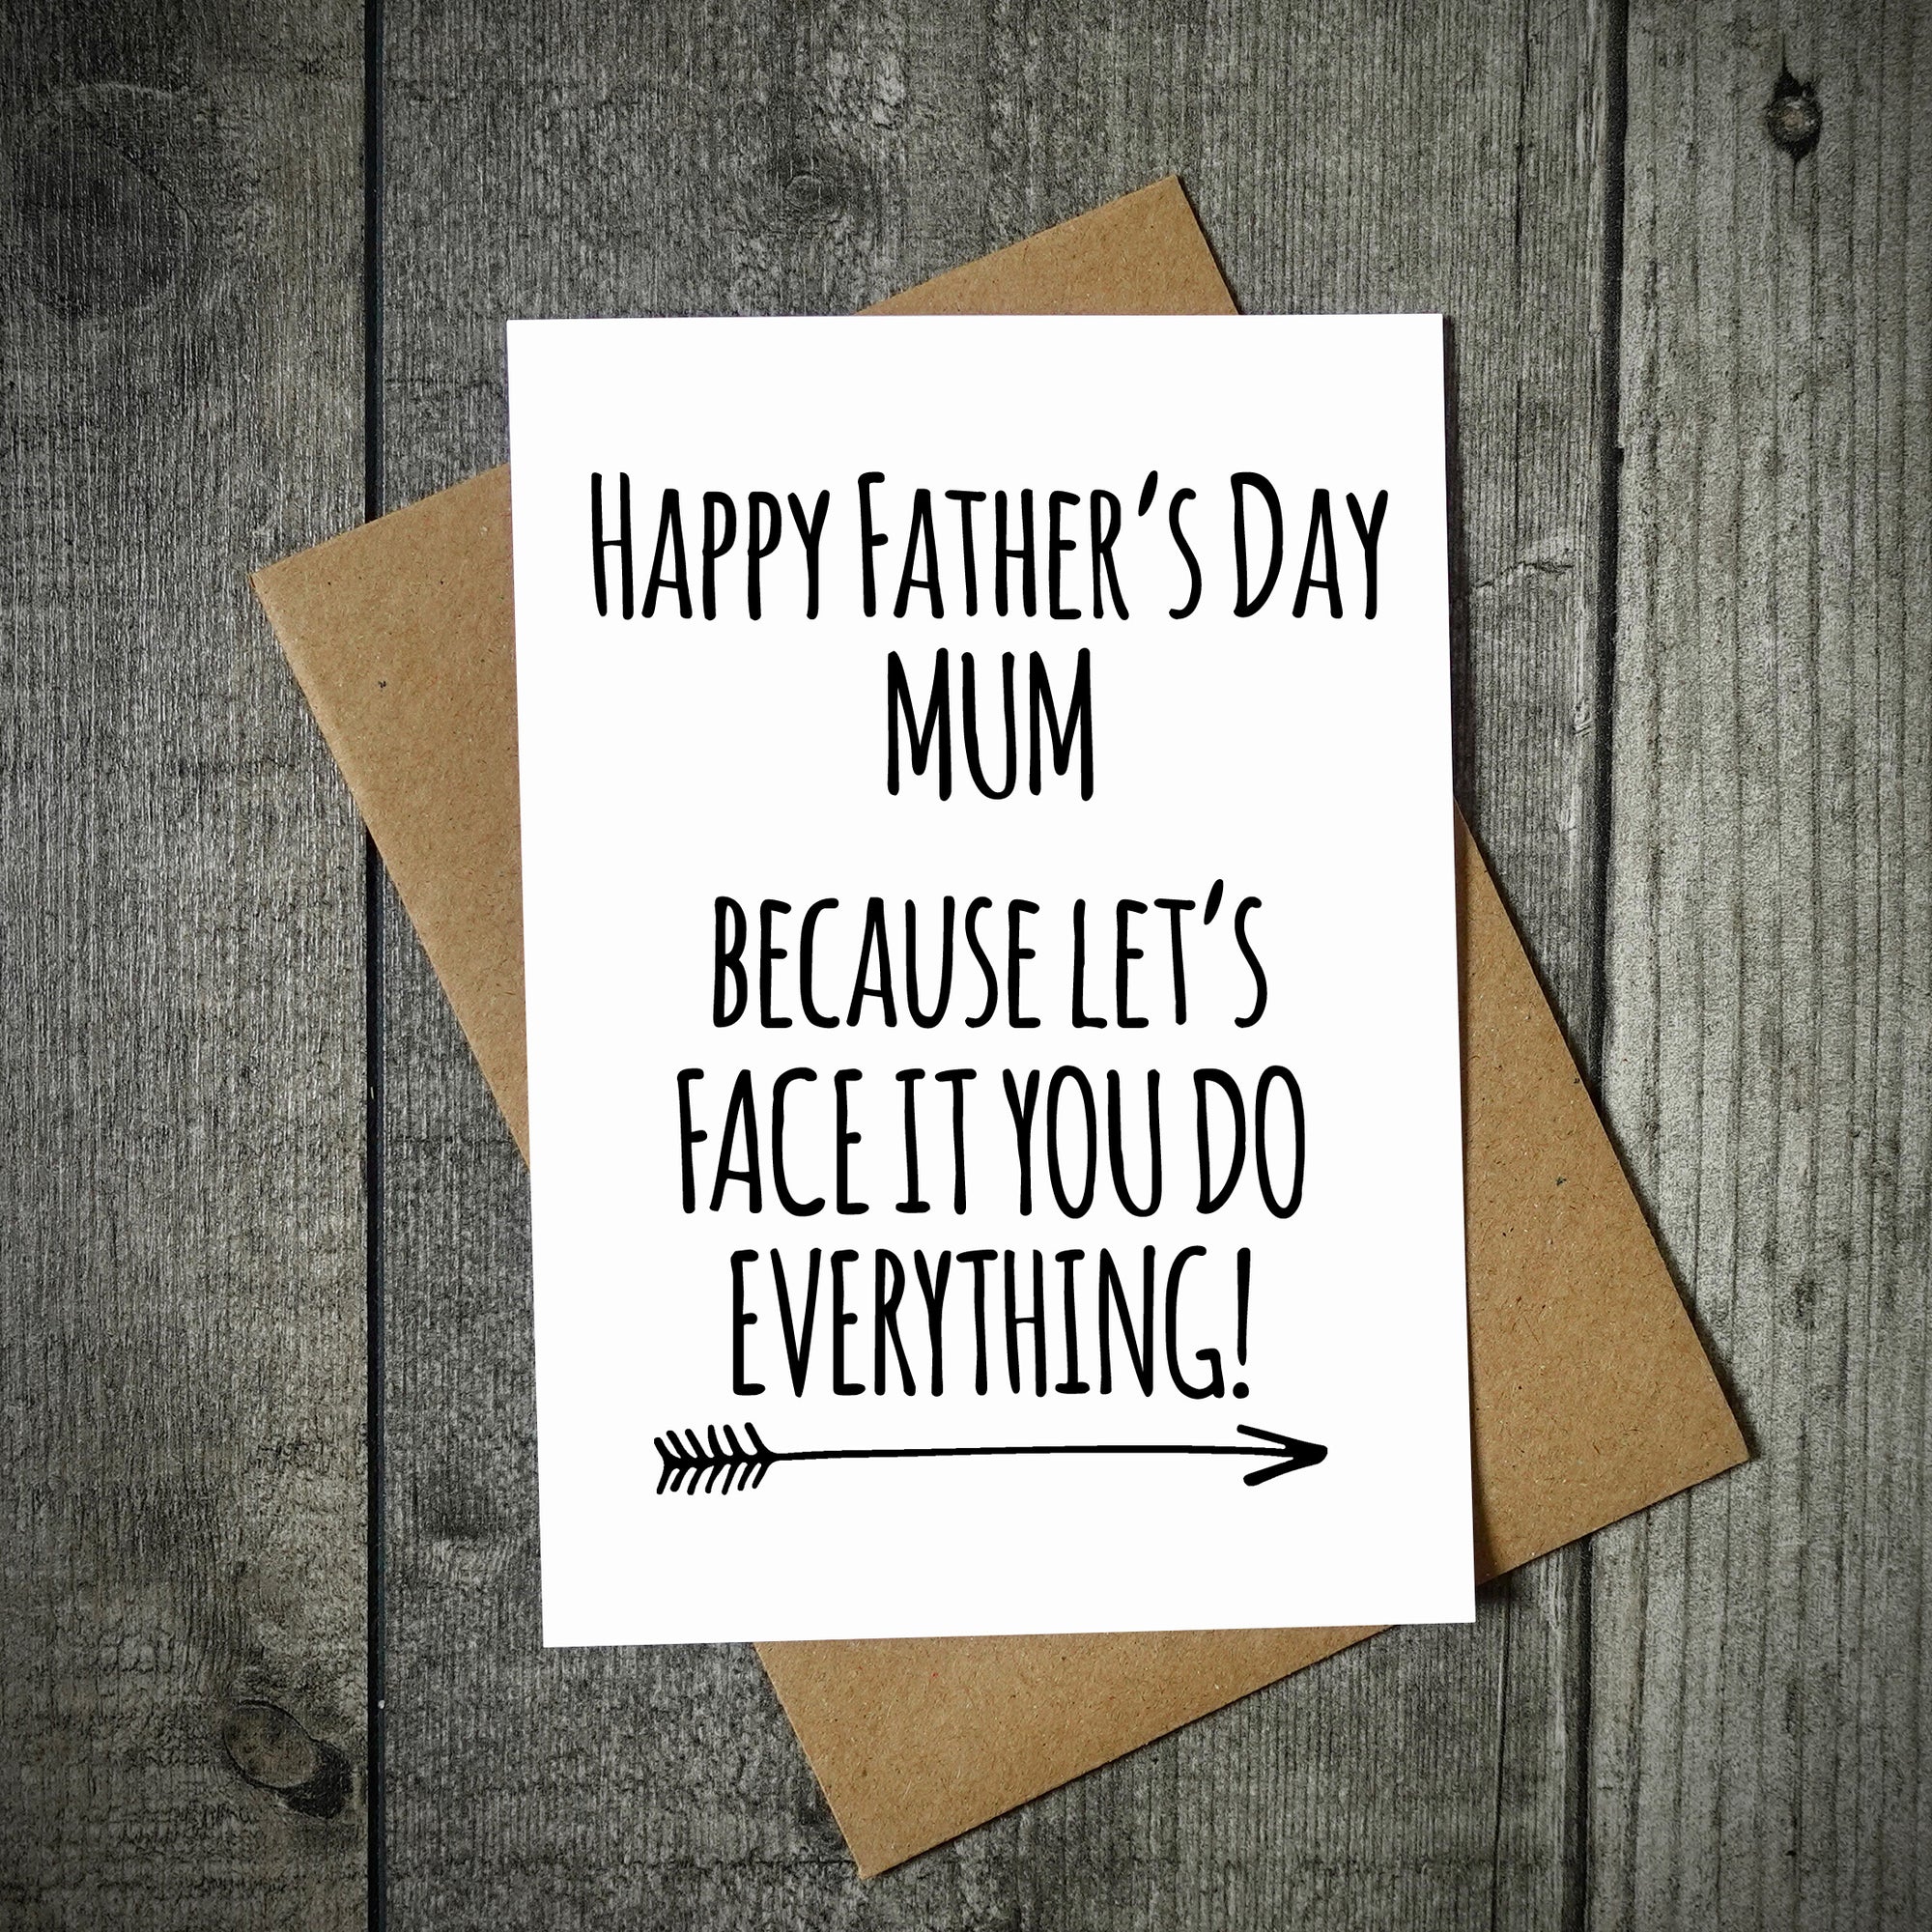 Happy Father's Day Mum Card Because Let's Face It You Do Everything